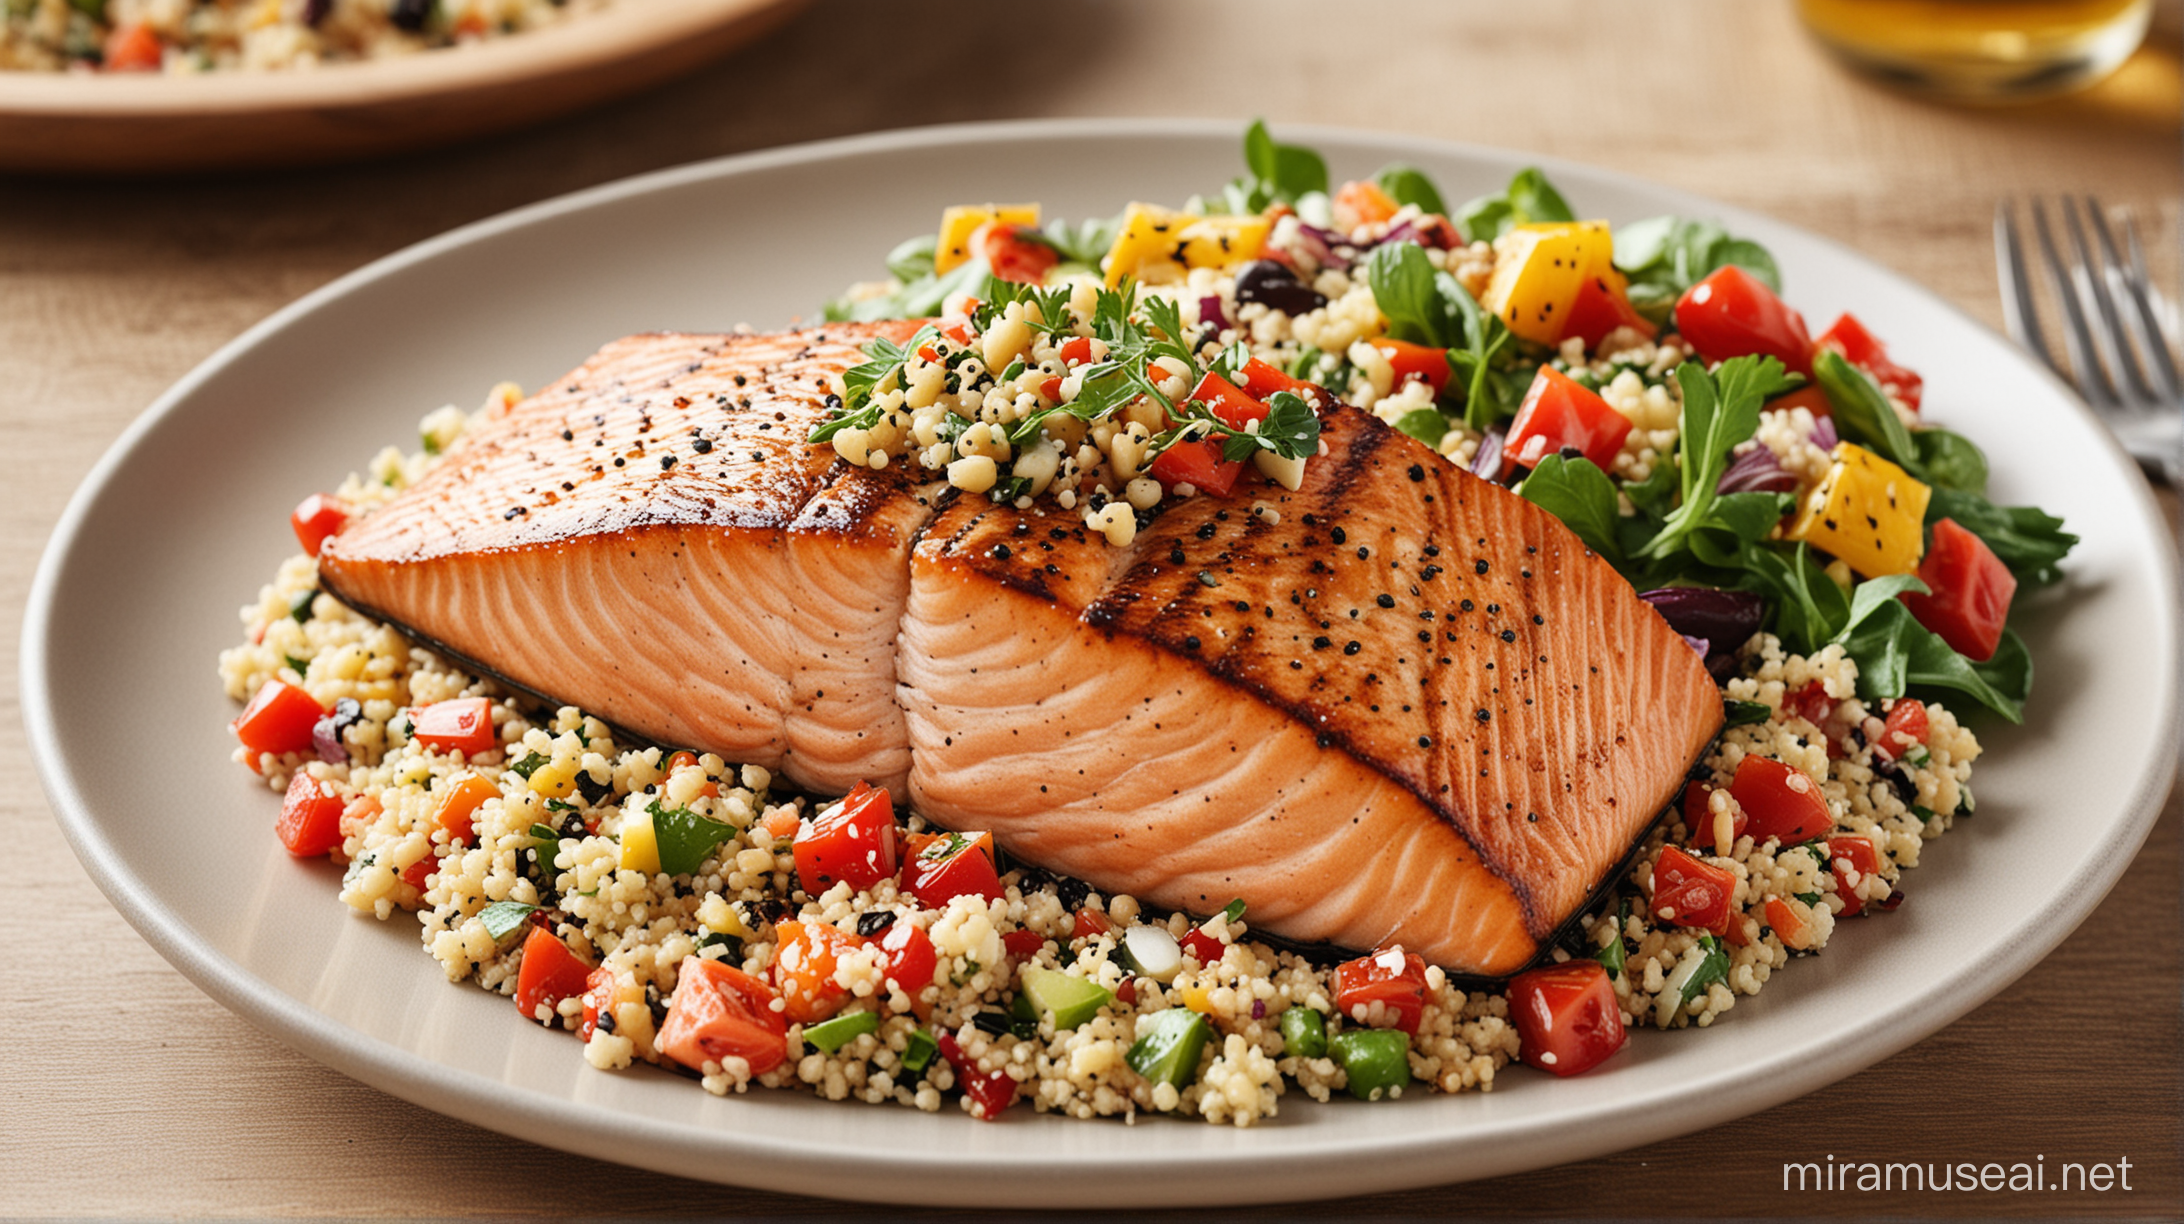 Grilled Salmon with Quinoa Salad, real and original hd image, make detailed and professional 